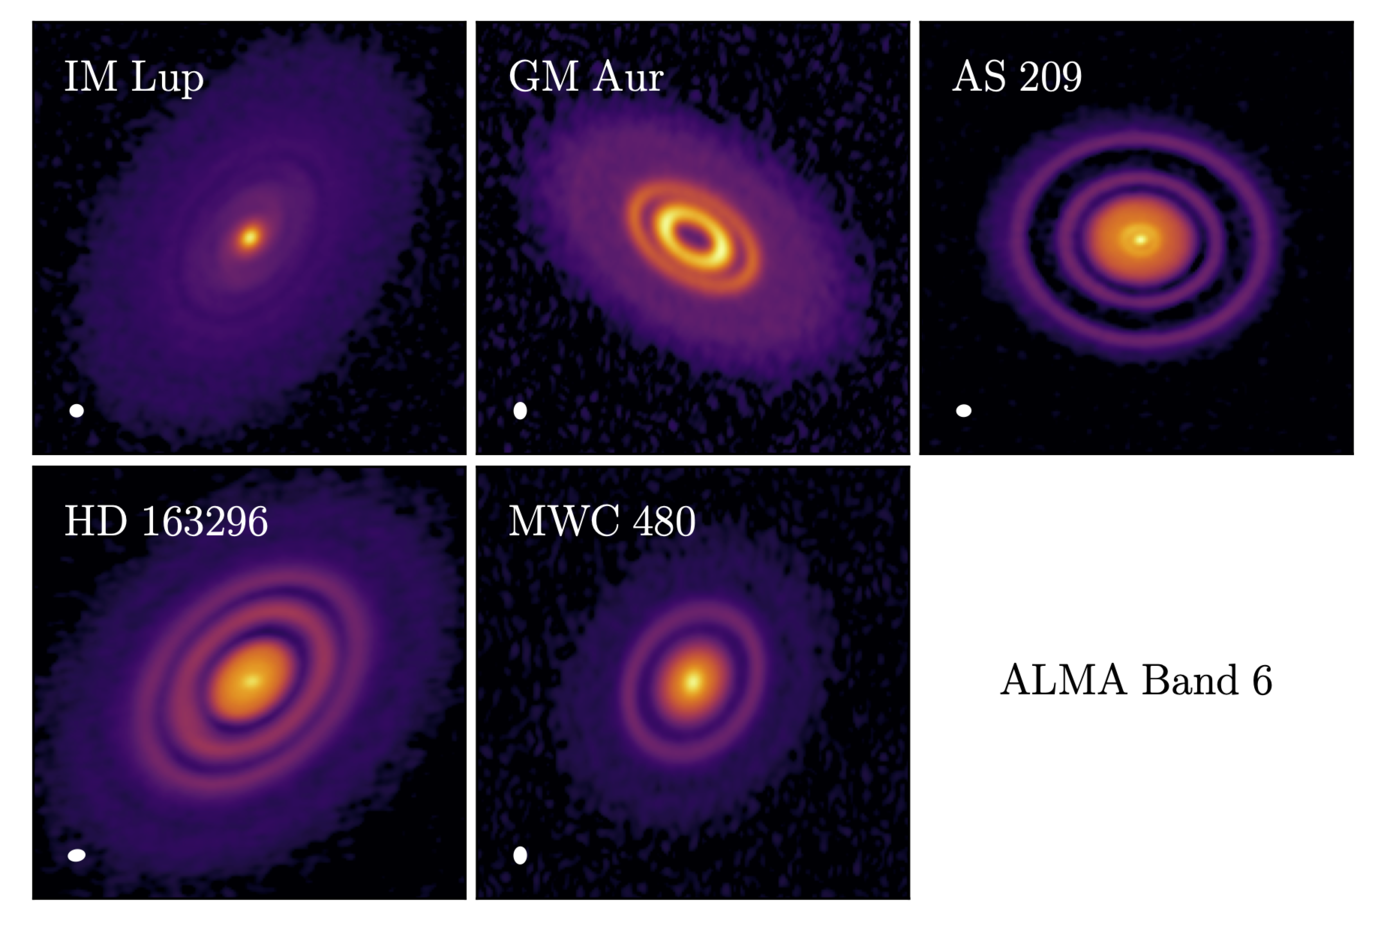 Emission from solid material coming from the MAPS disks at ALMA wavelengths